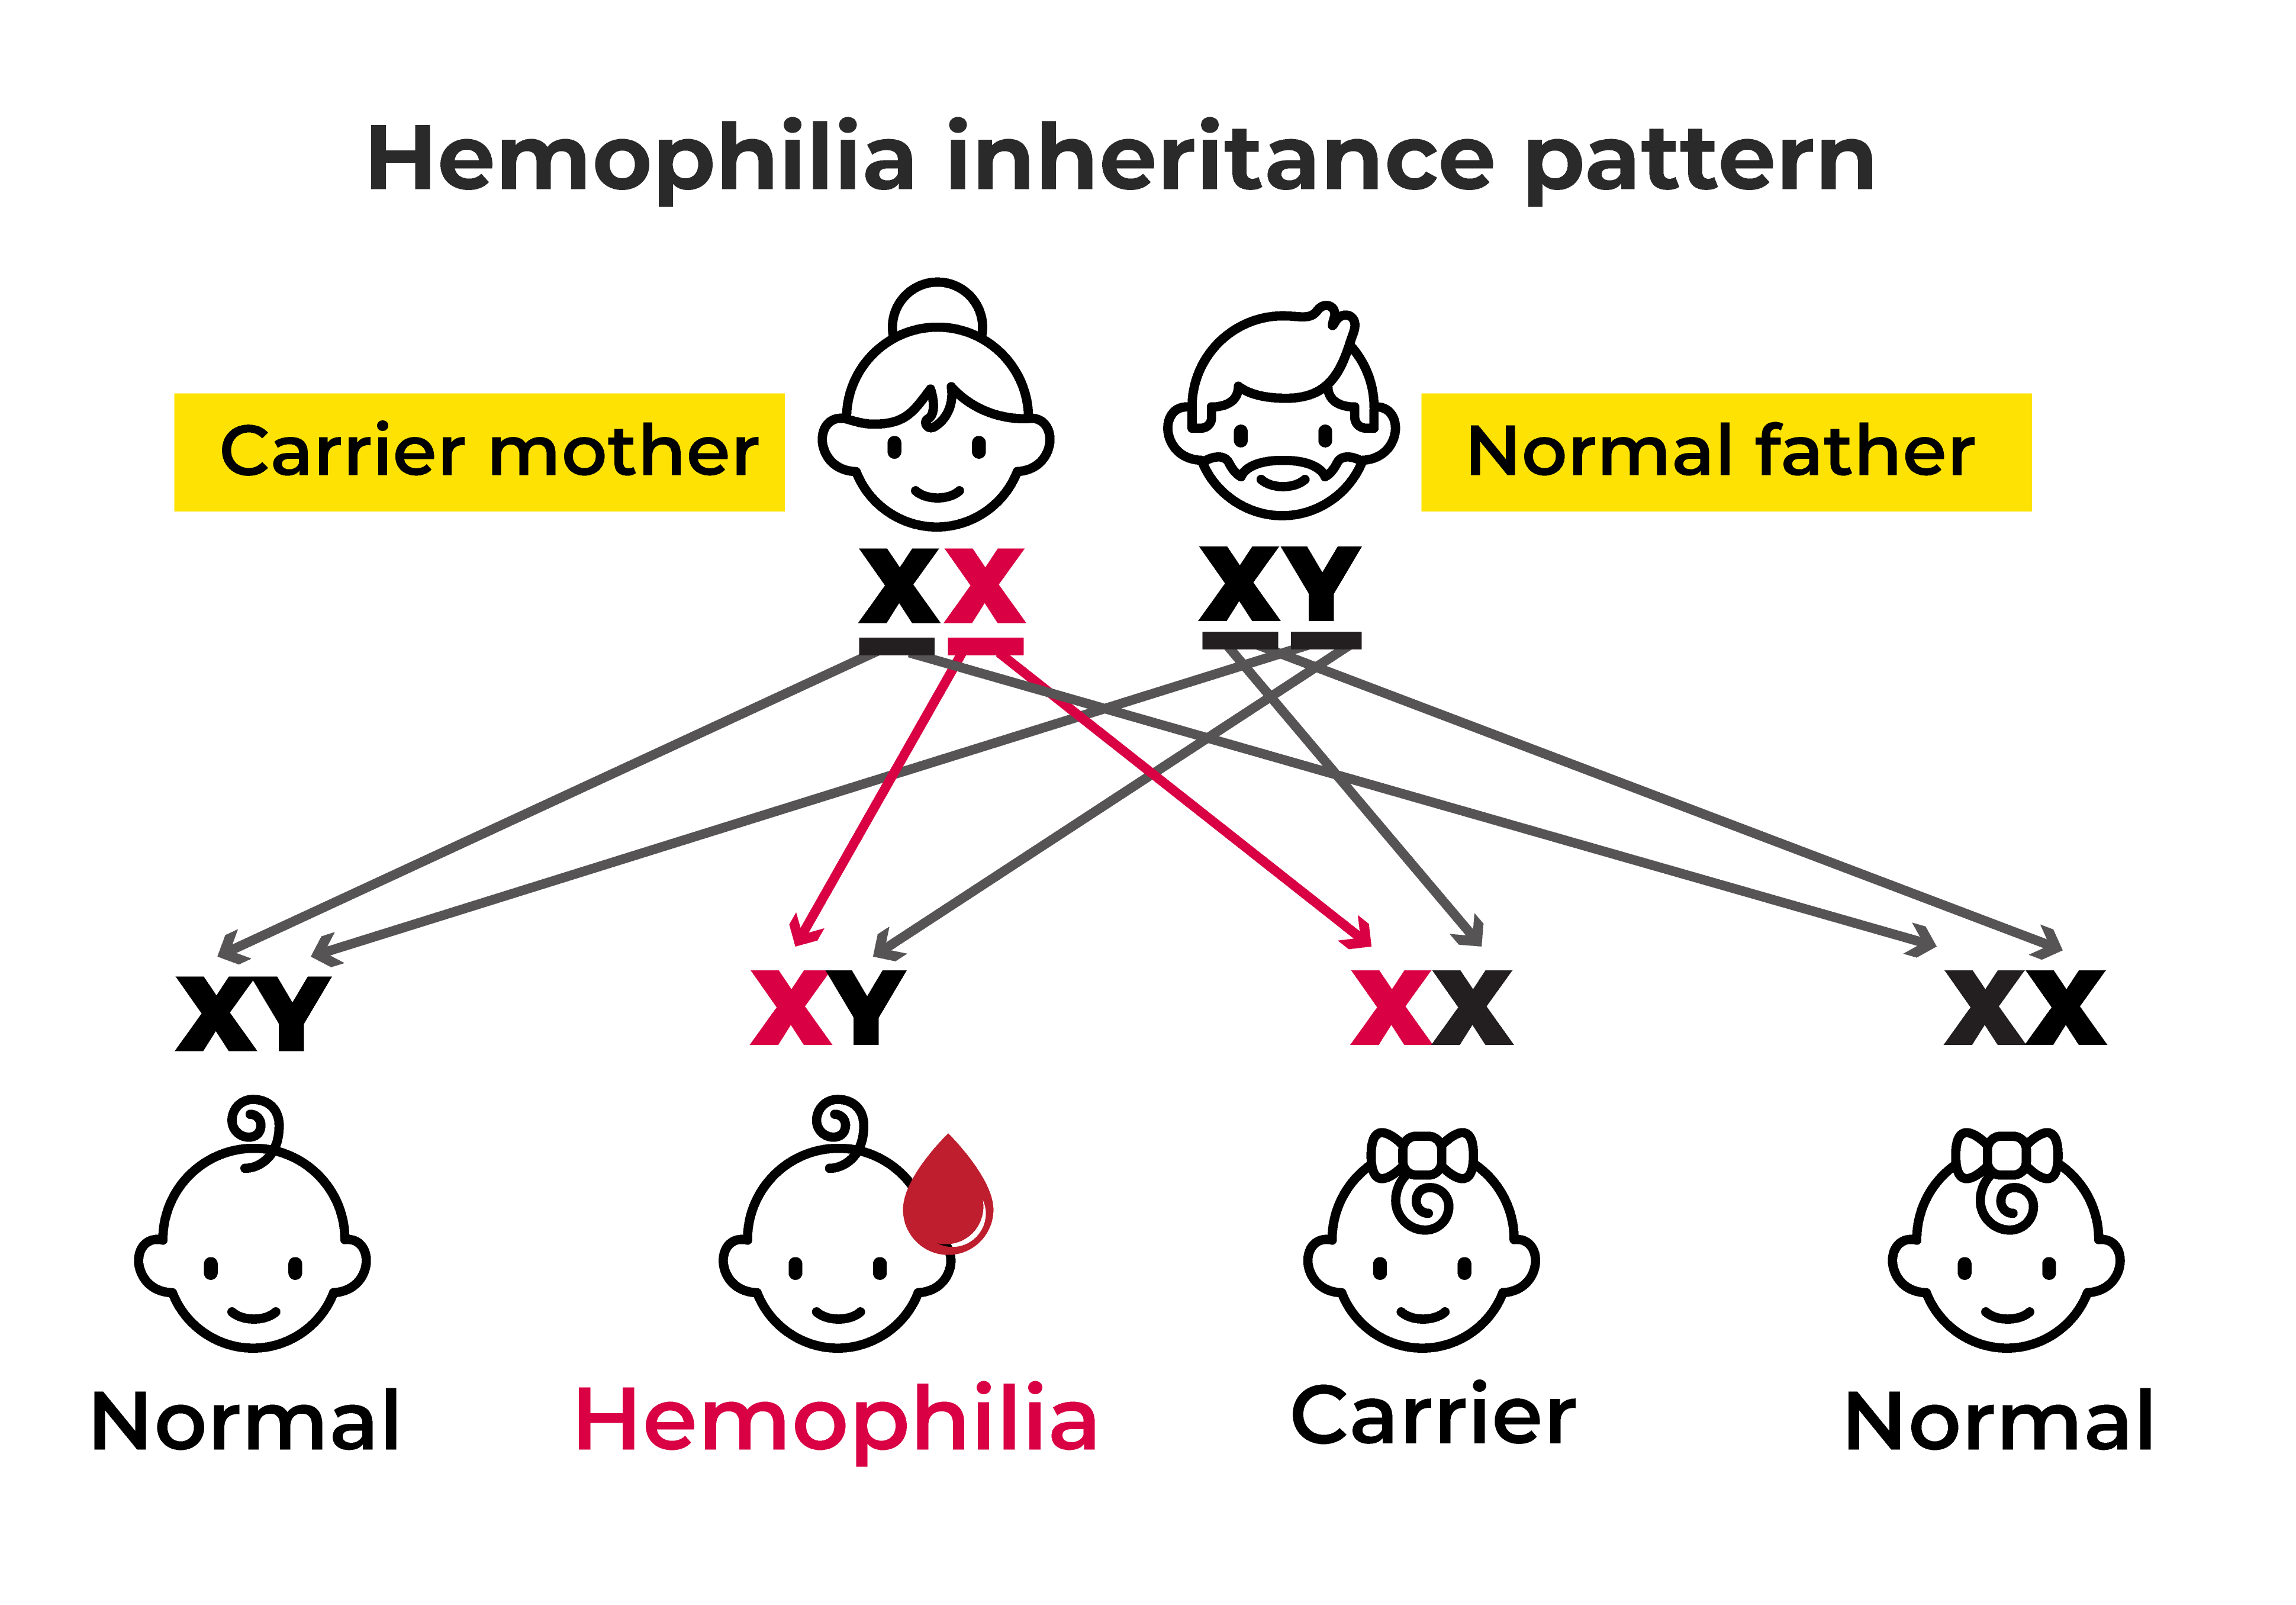 Hemophilia with a carrier mother and an unaffected father